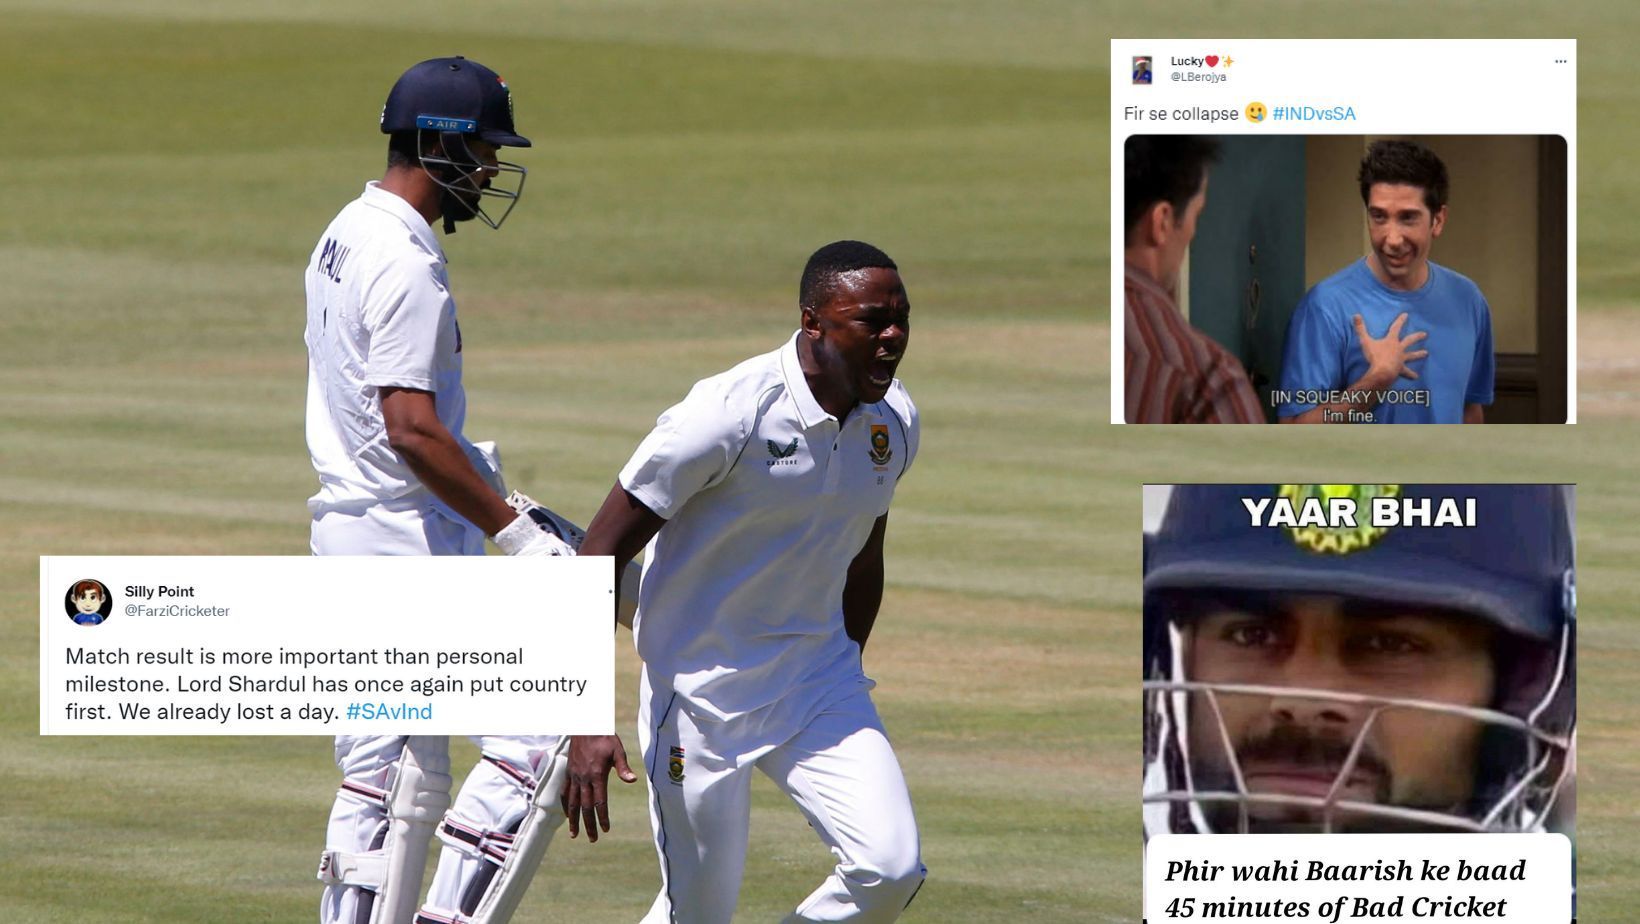 Twitter trolls India after batting collapse.